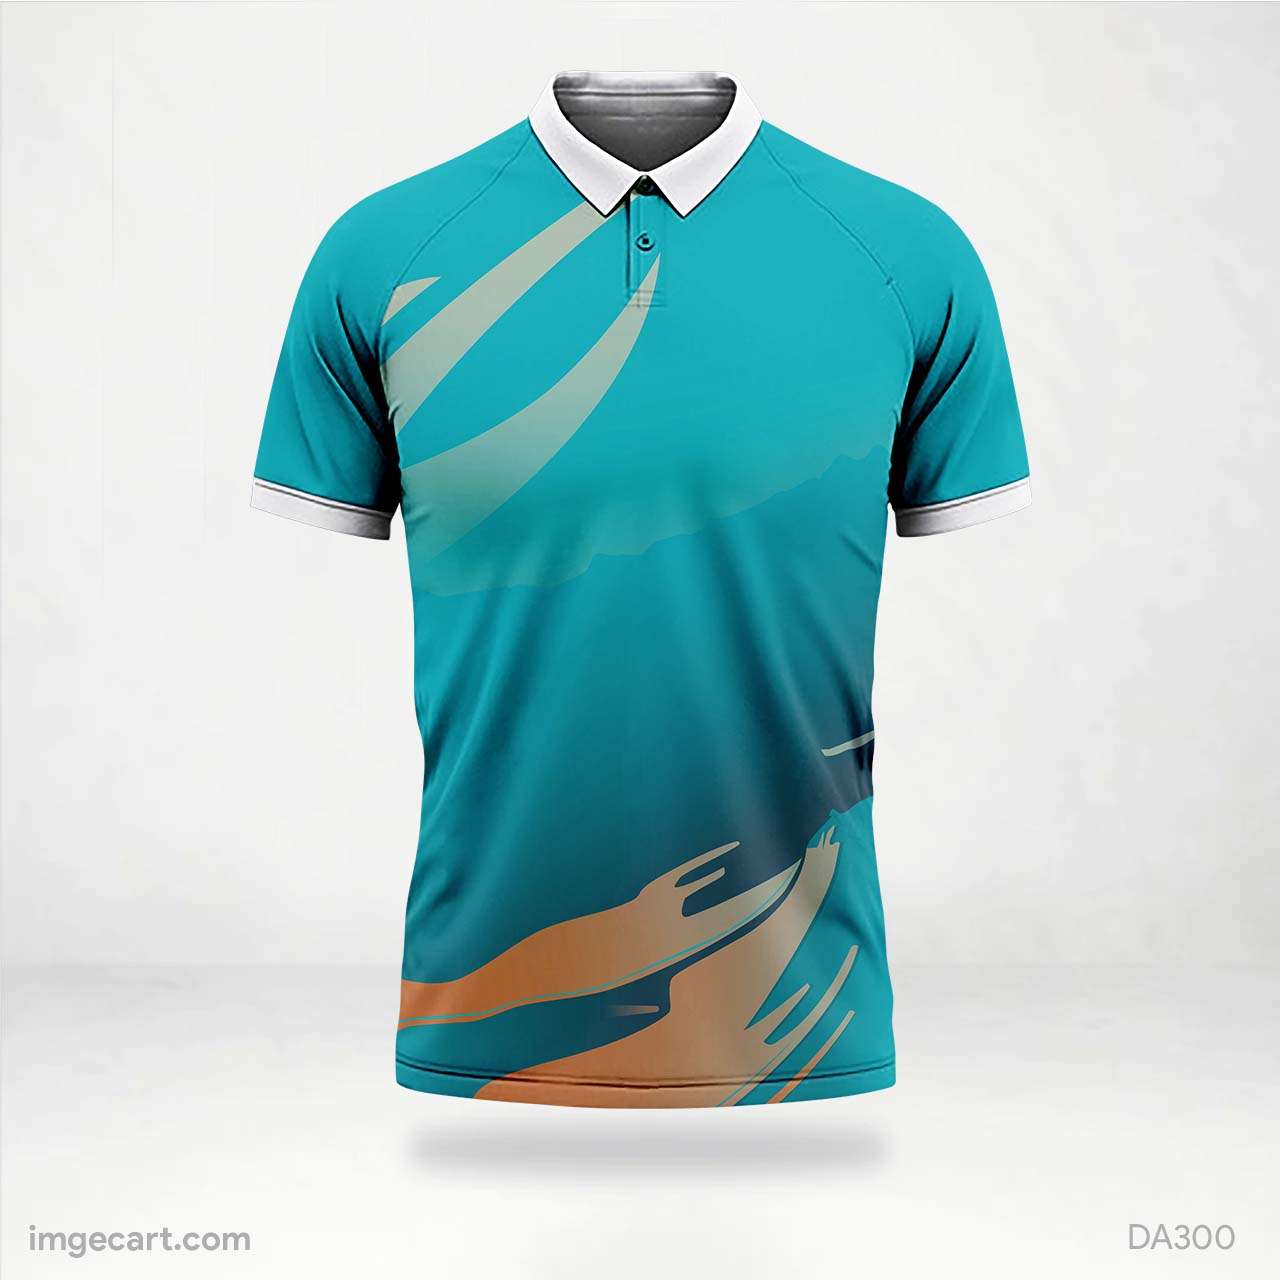 E-sports Jersey Design Blue with yellow Sublimation - imgecart